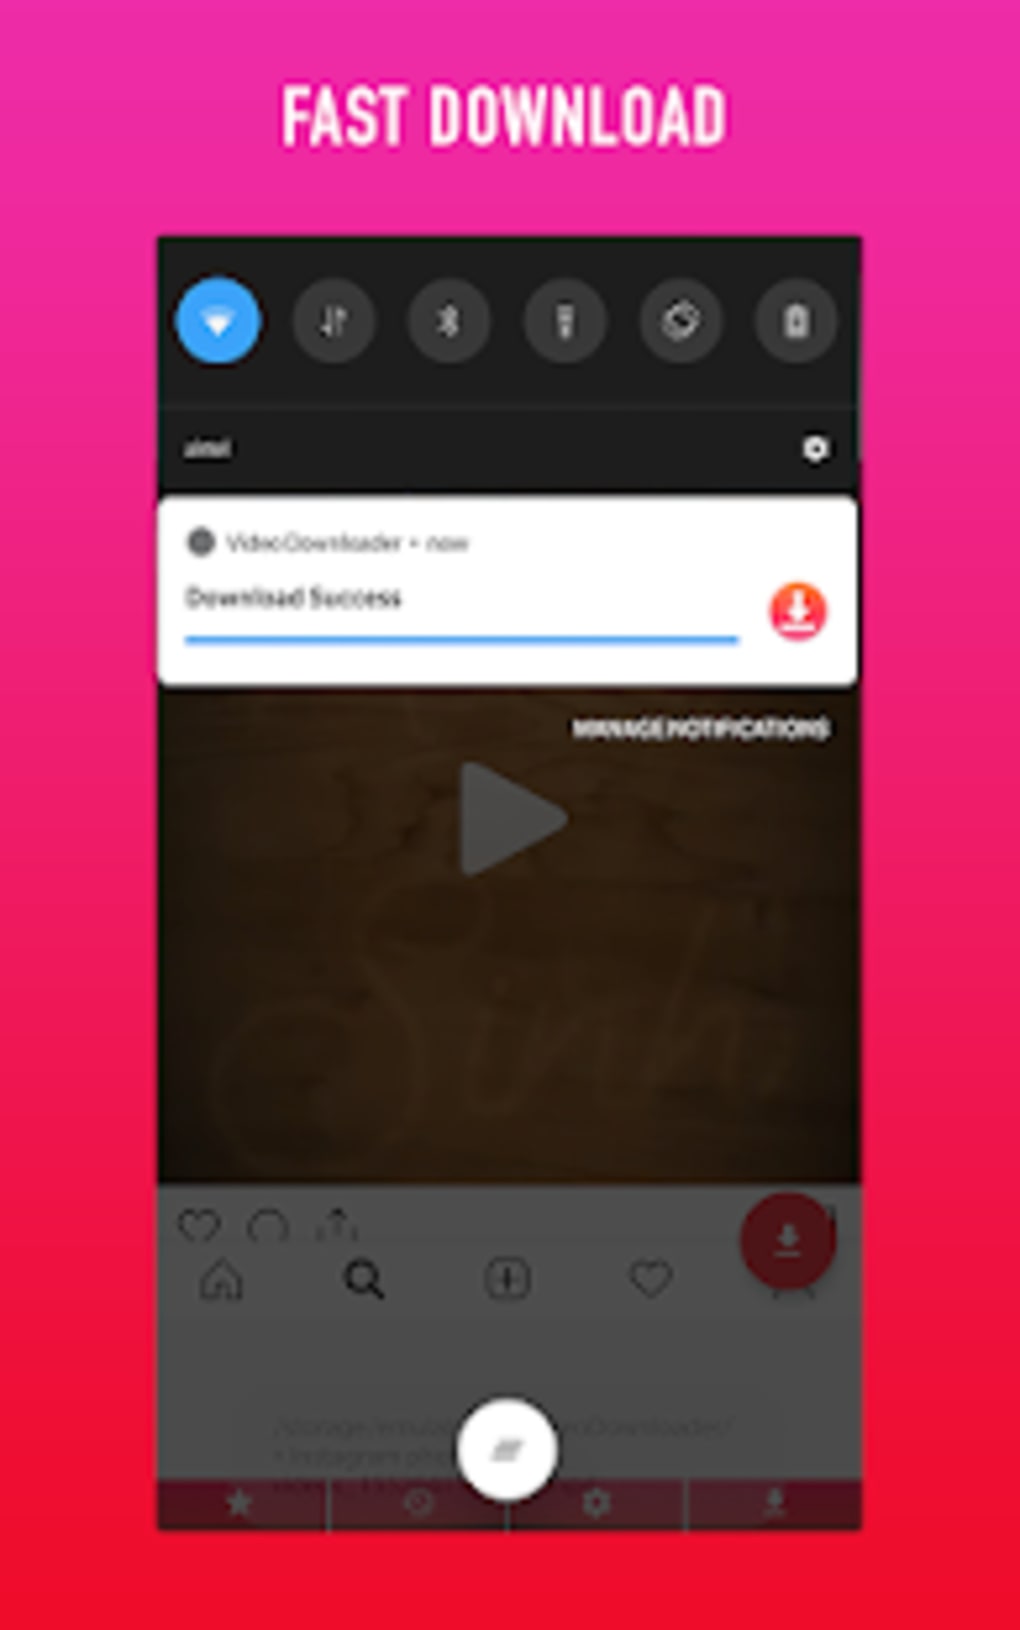 X Video Downloader - Free Video Downloader for Android - Download Android